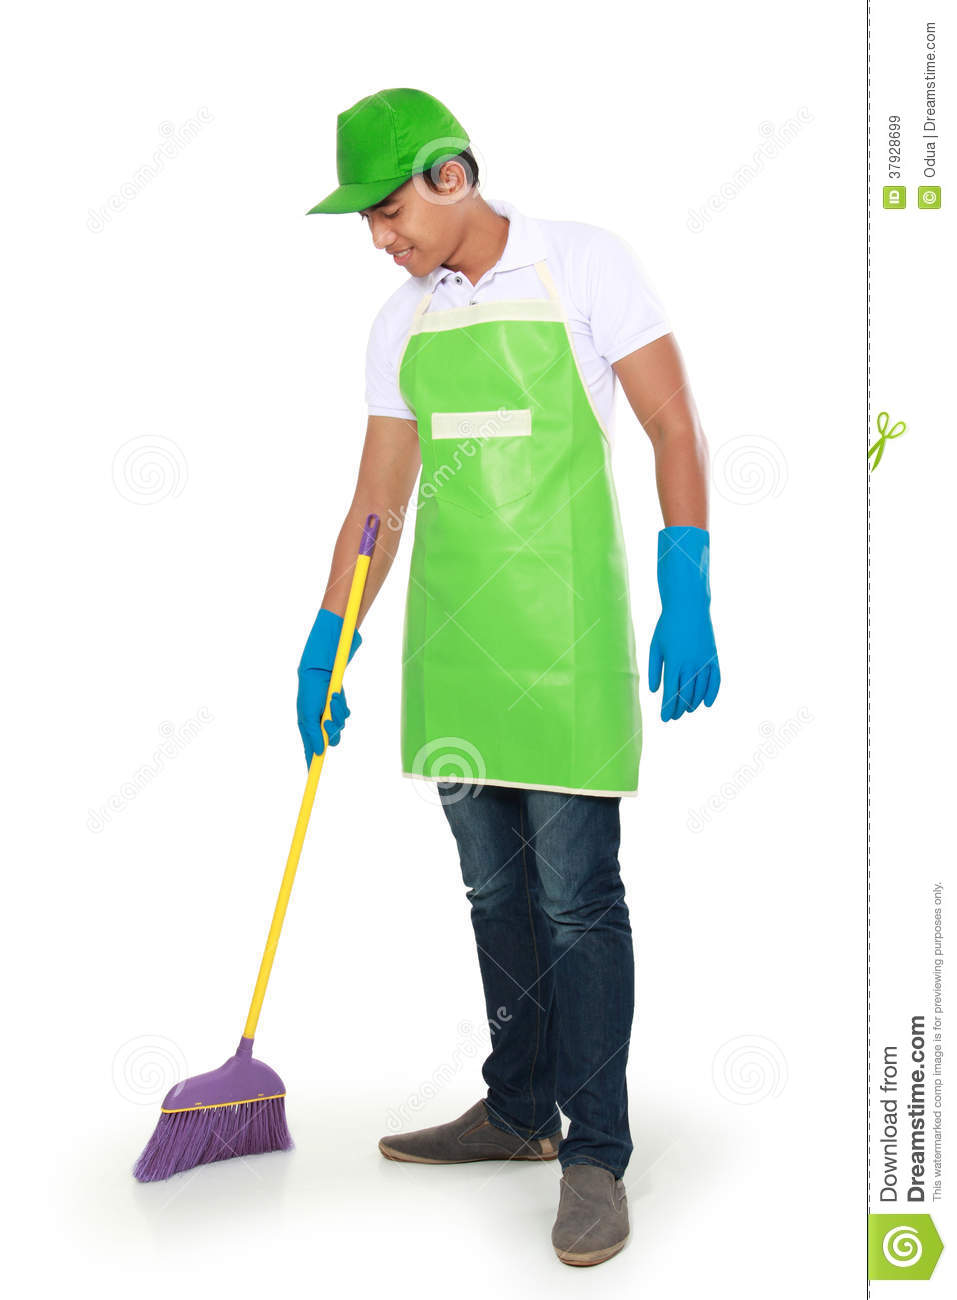 Portrait Of Young Man With Cleaning Equipment  Sweeping The Floor